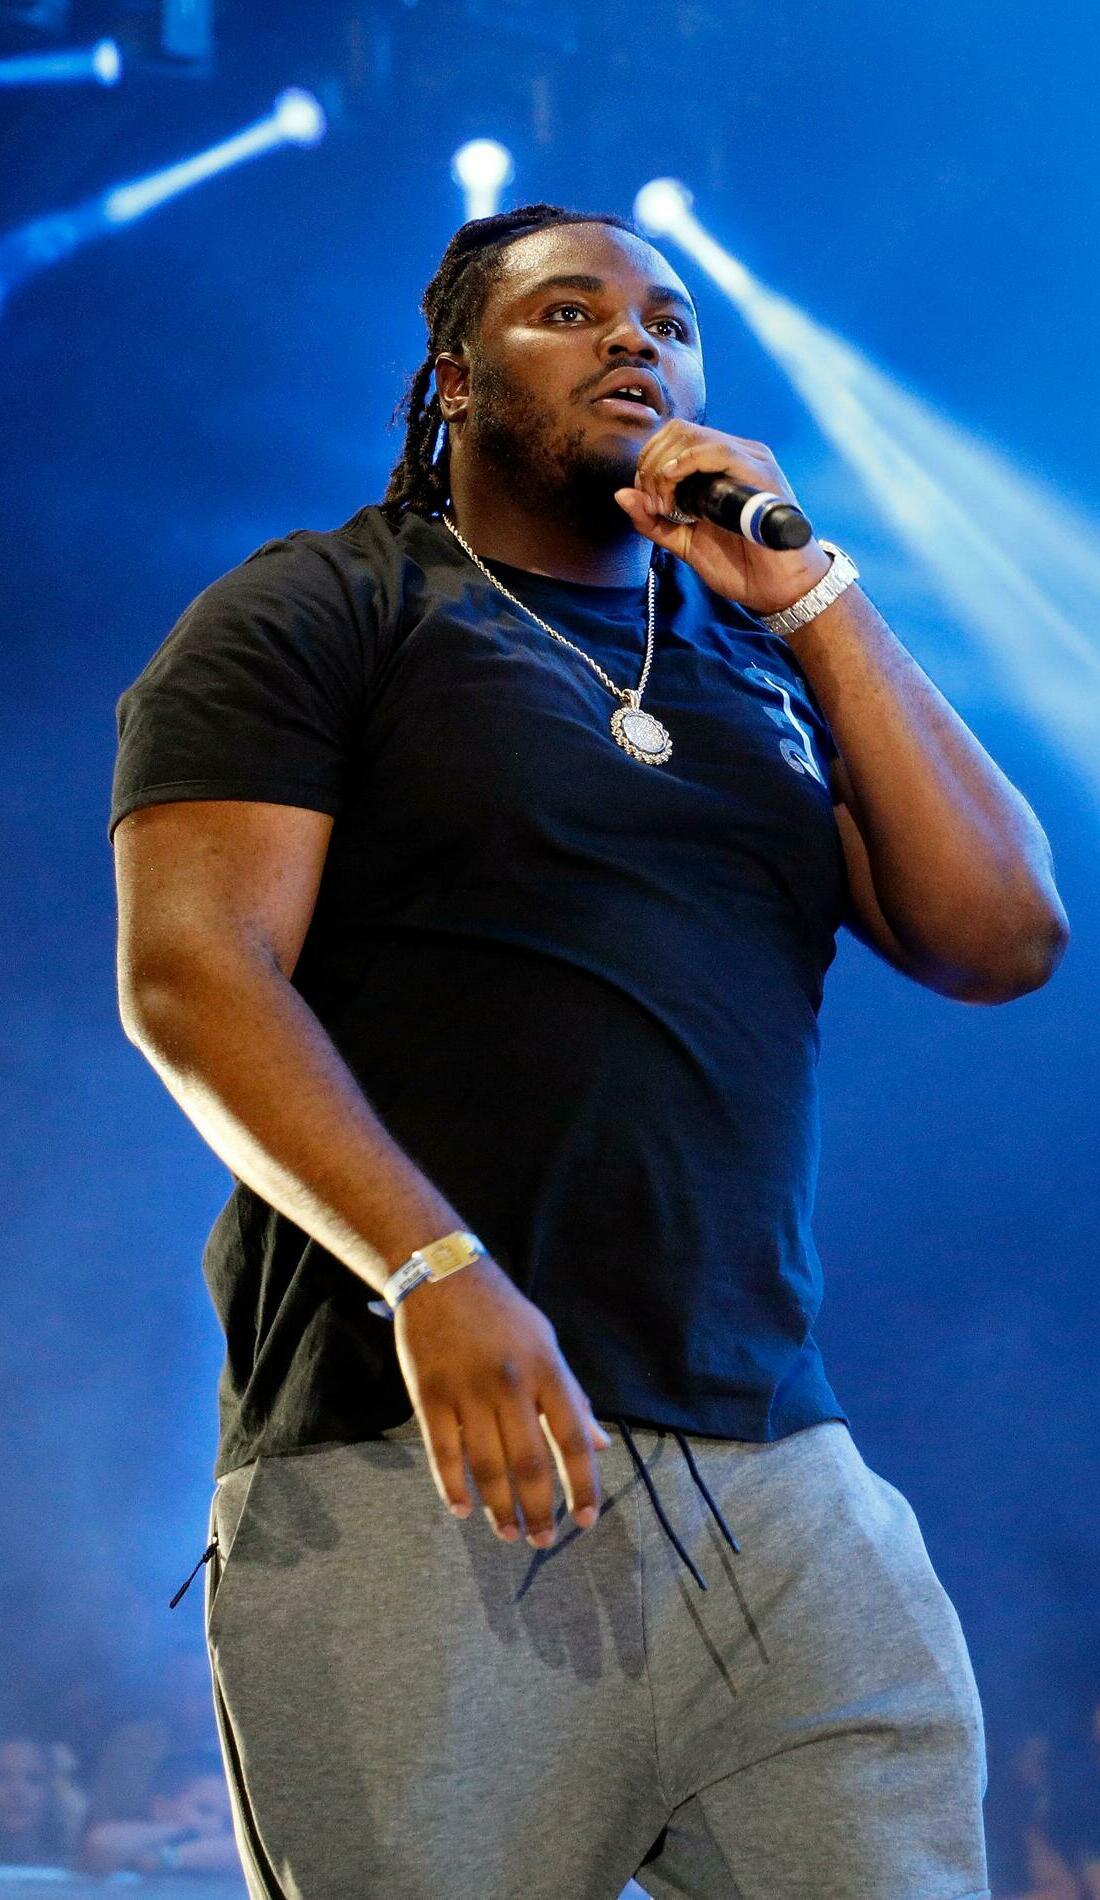 A Tee Grizzley live event